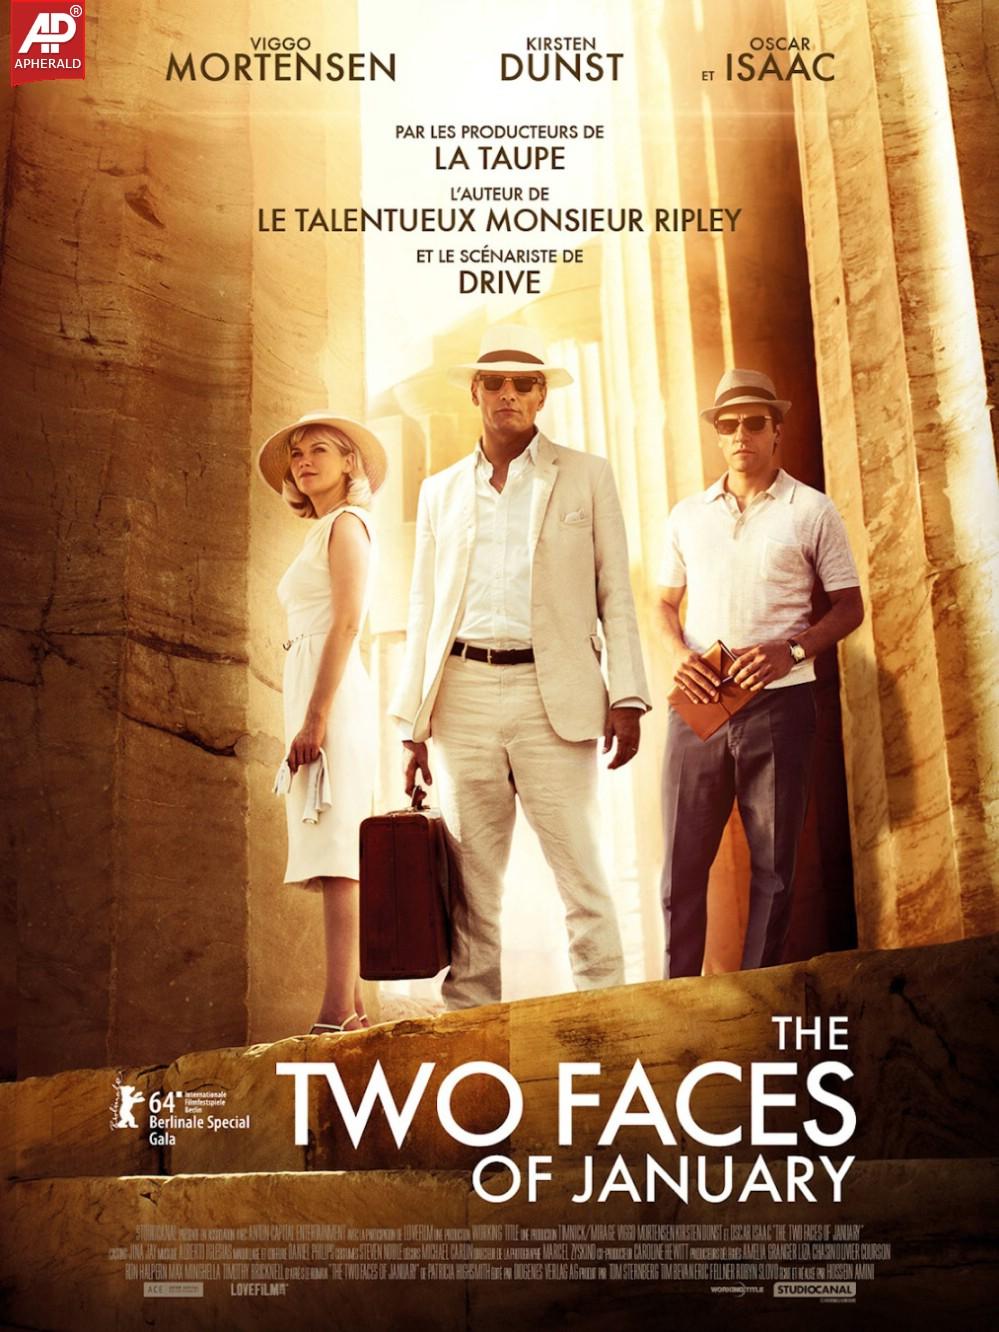 The Two faces of January Pramotional Stills